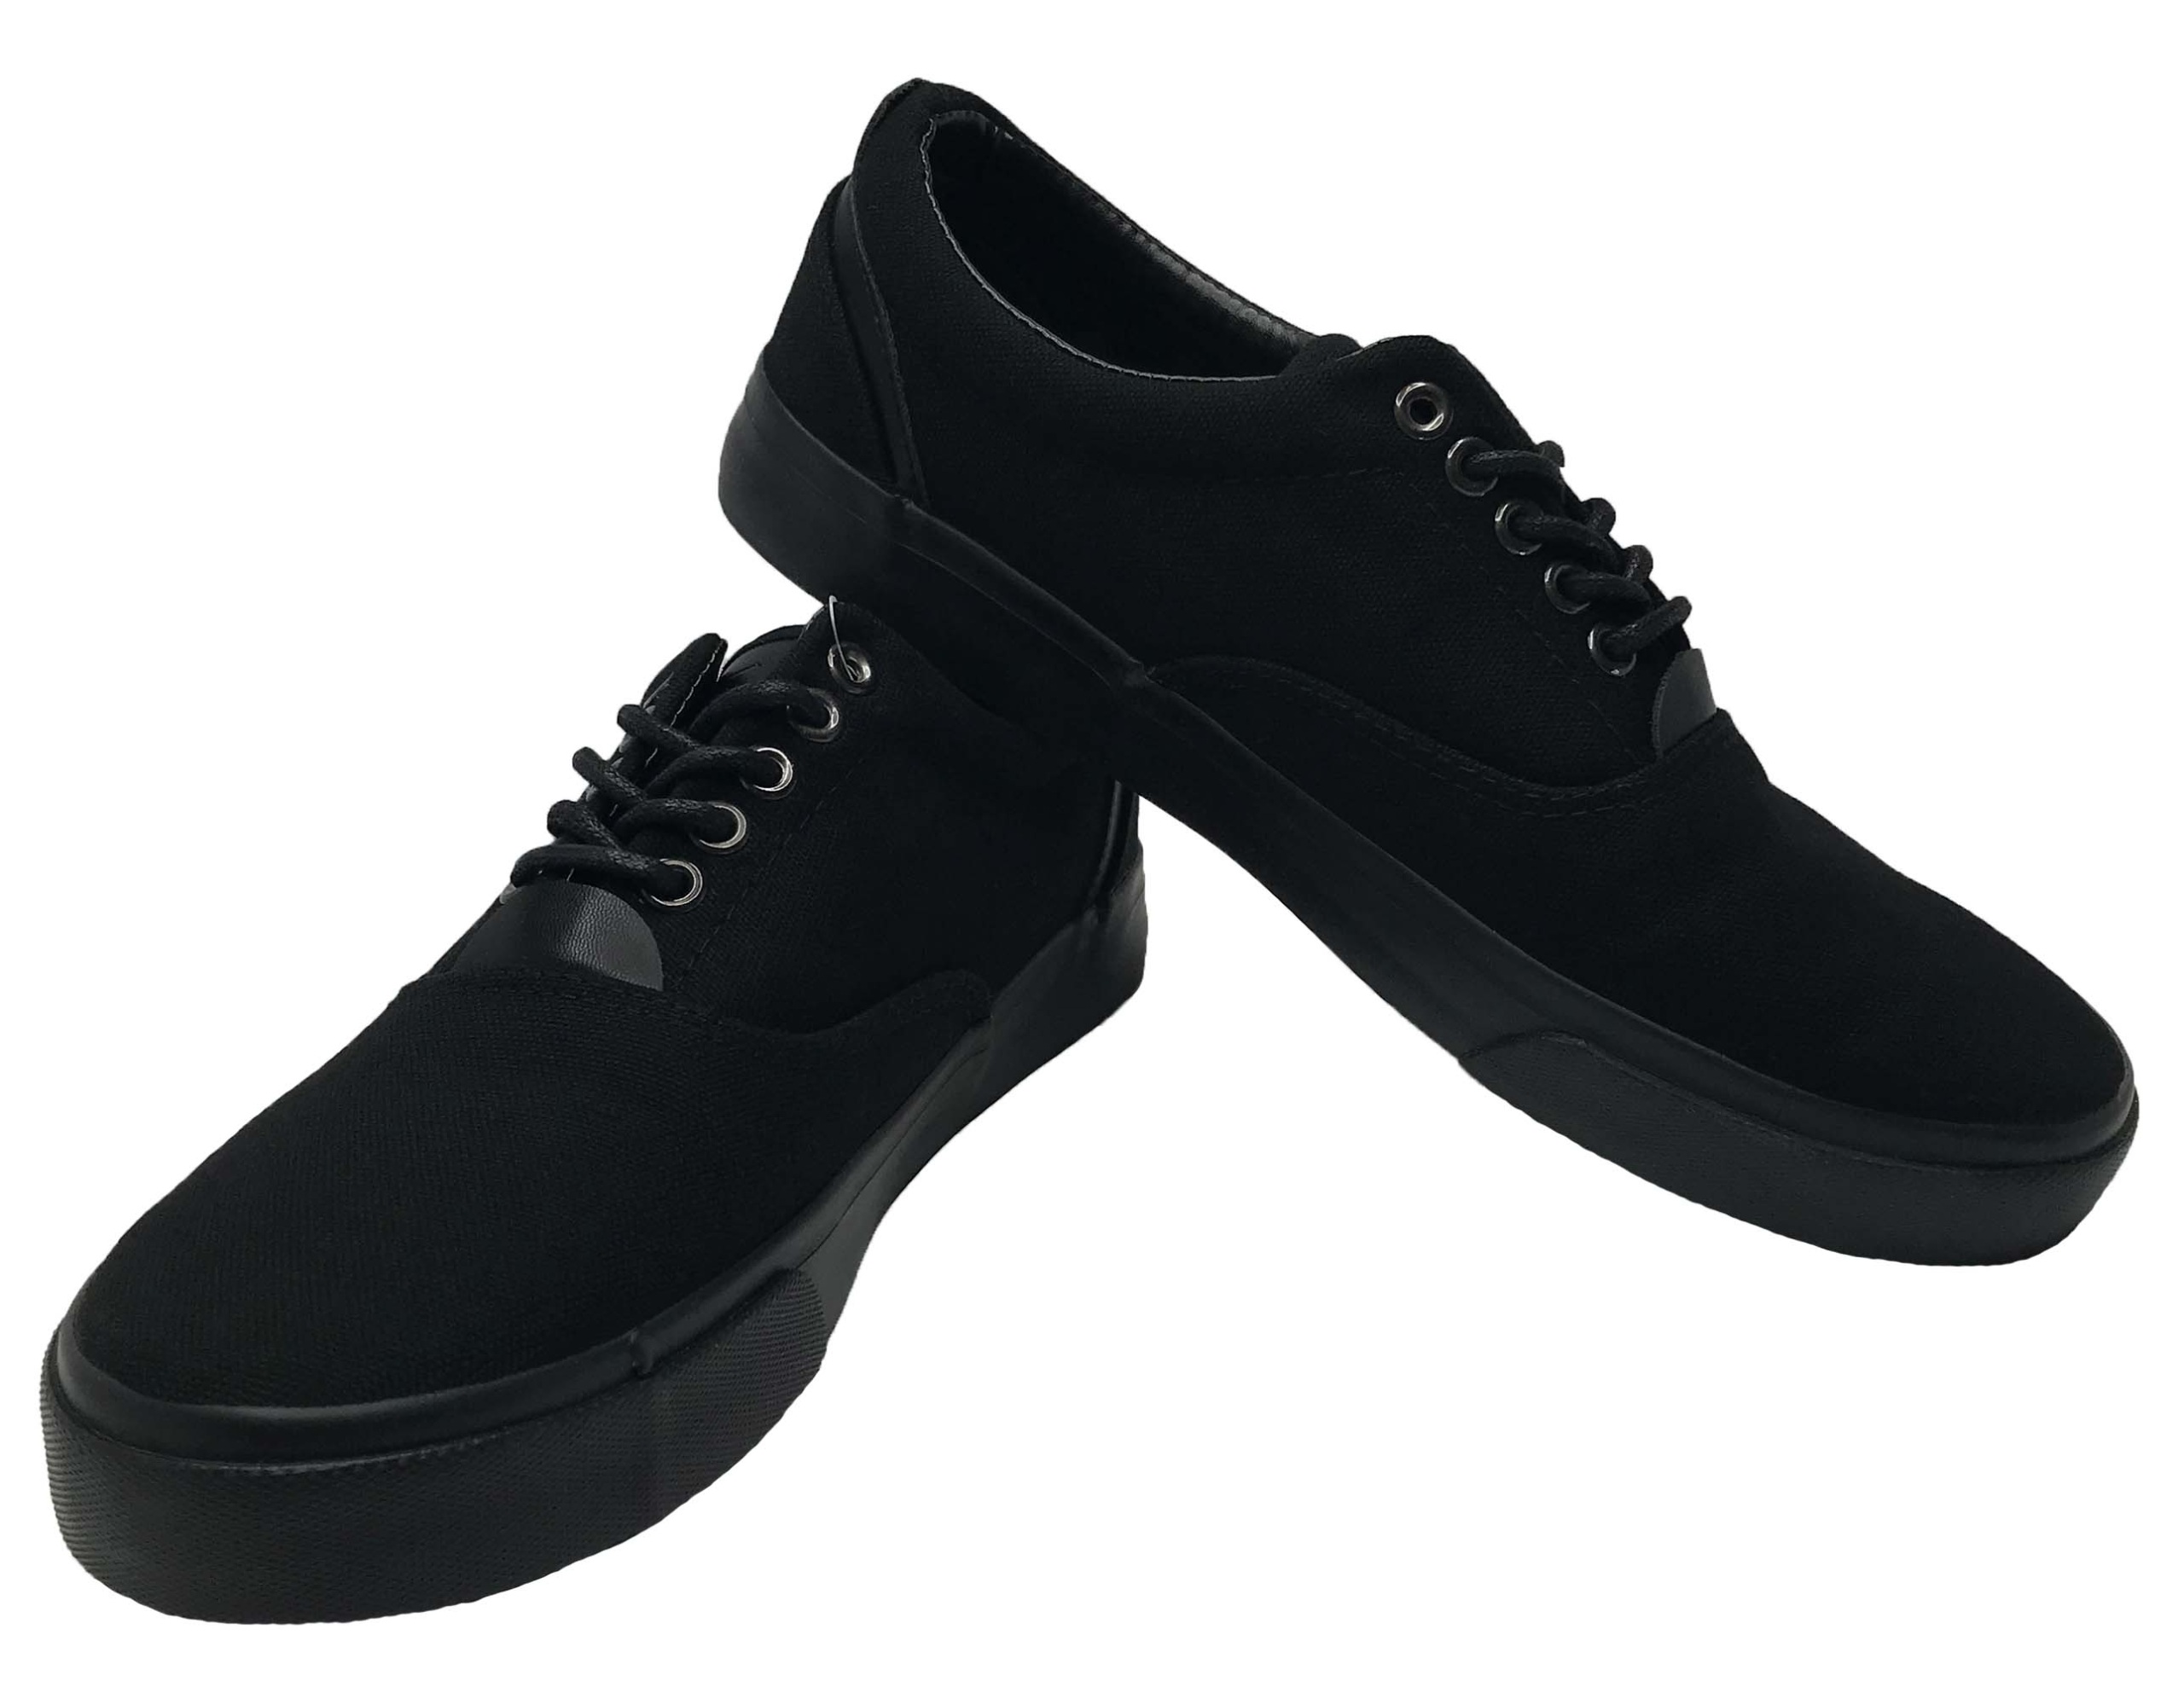 Polo Black Dress Shoes / Sneaker Beverly Hills Polo Club